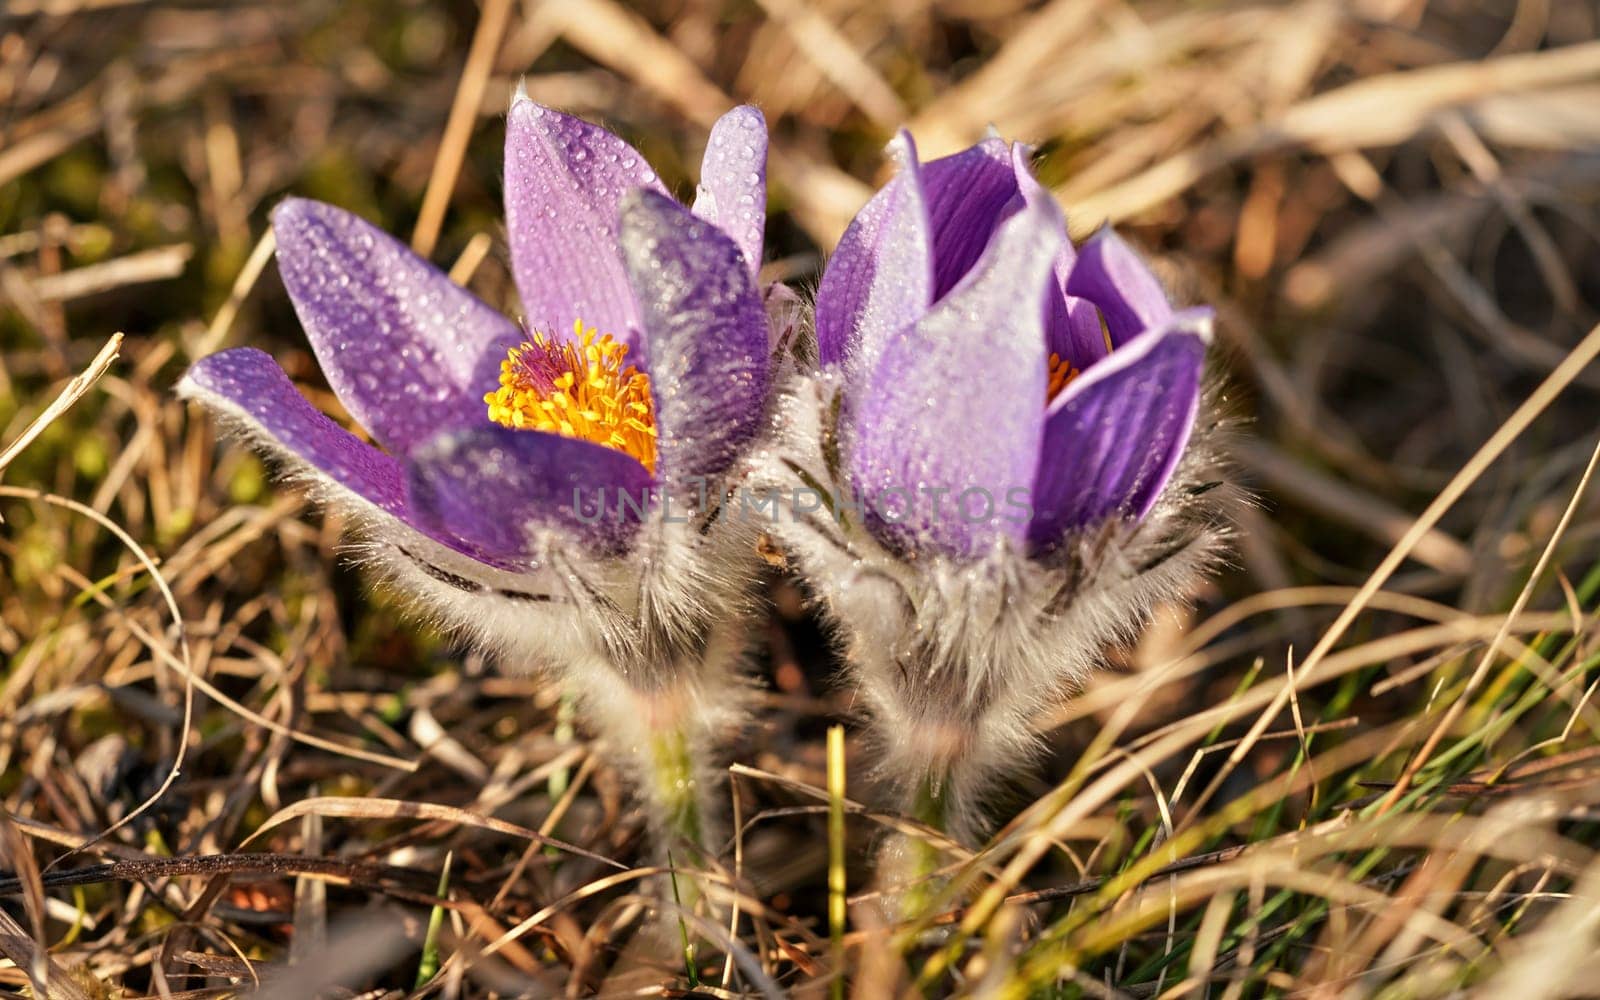 Purple / Violet greater pasque flower - Pulsatilla grandis - growing in dry grass, sun shines on petals, close up detail by Ivanko